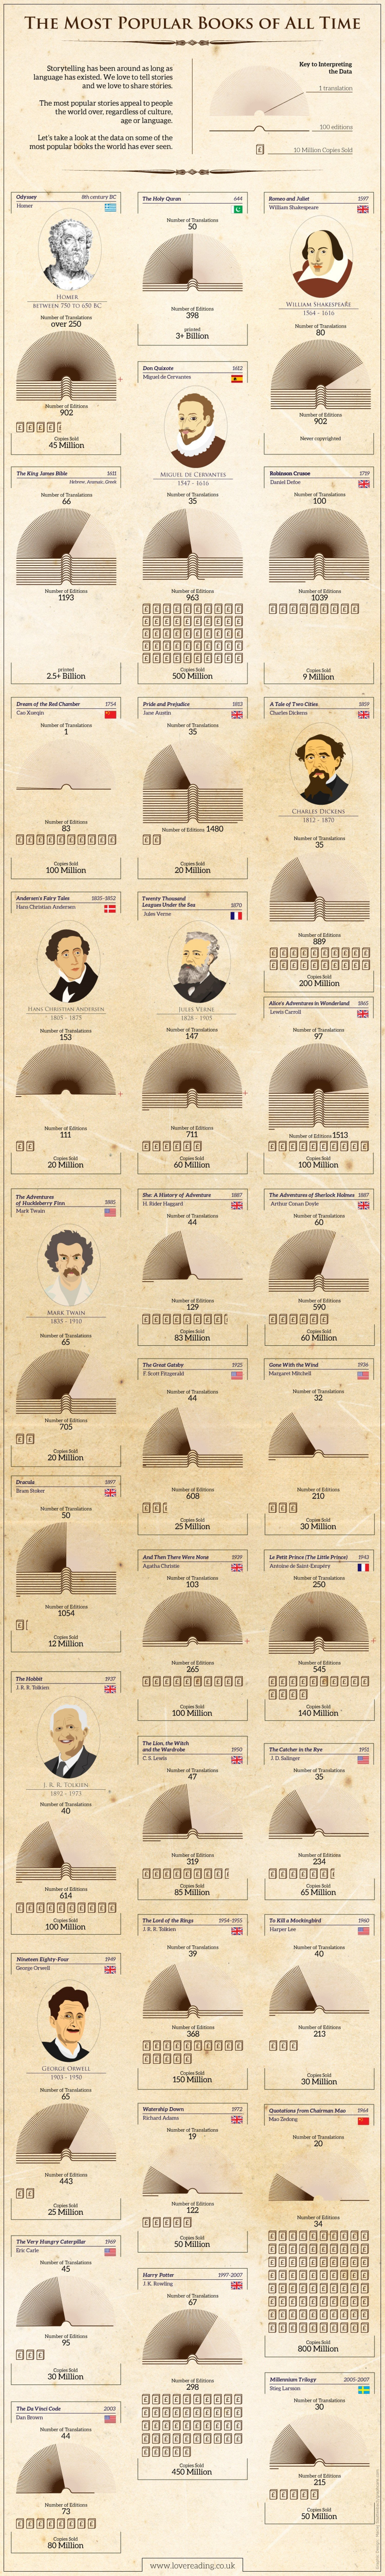 The Most Popular Books Infographic